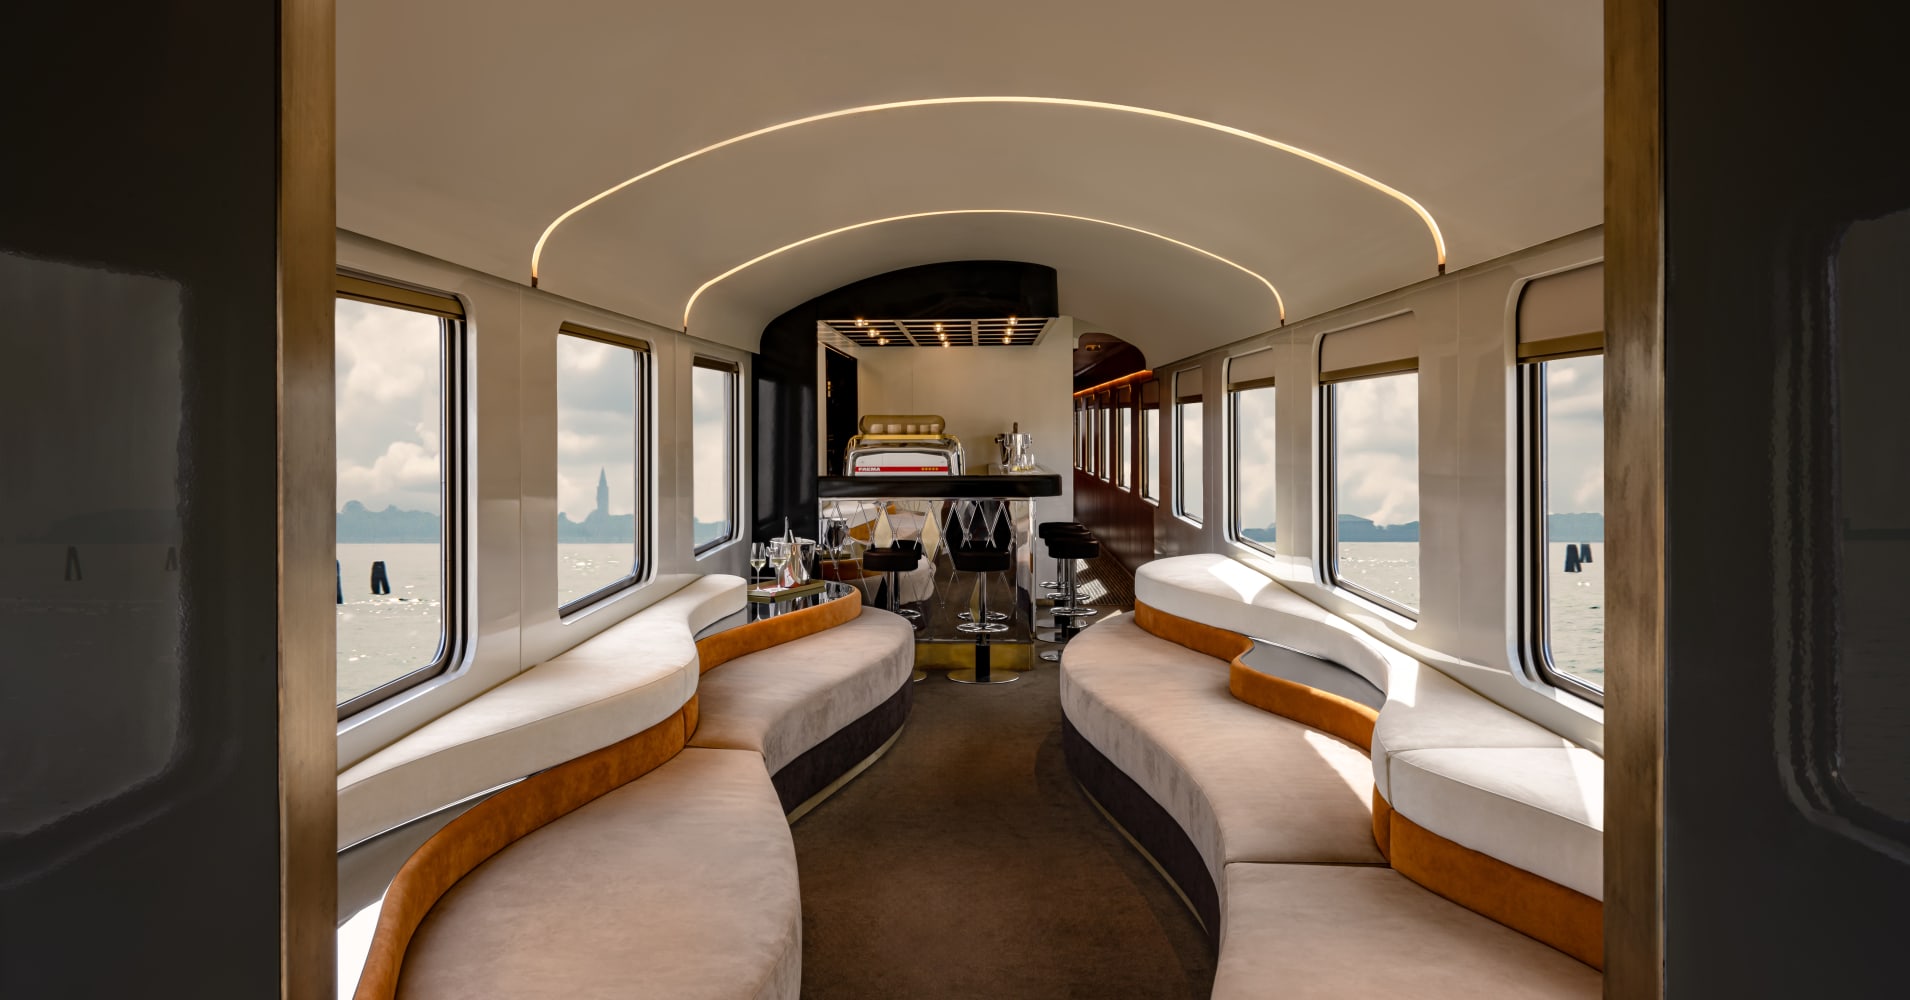 italy's new 'orient express' isn't running yet — but rates are already soaring